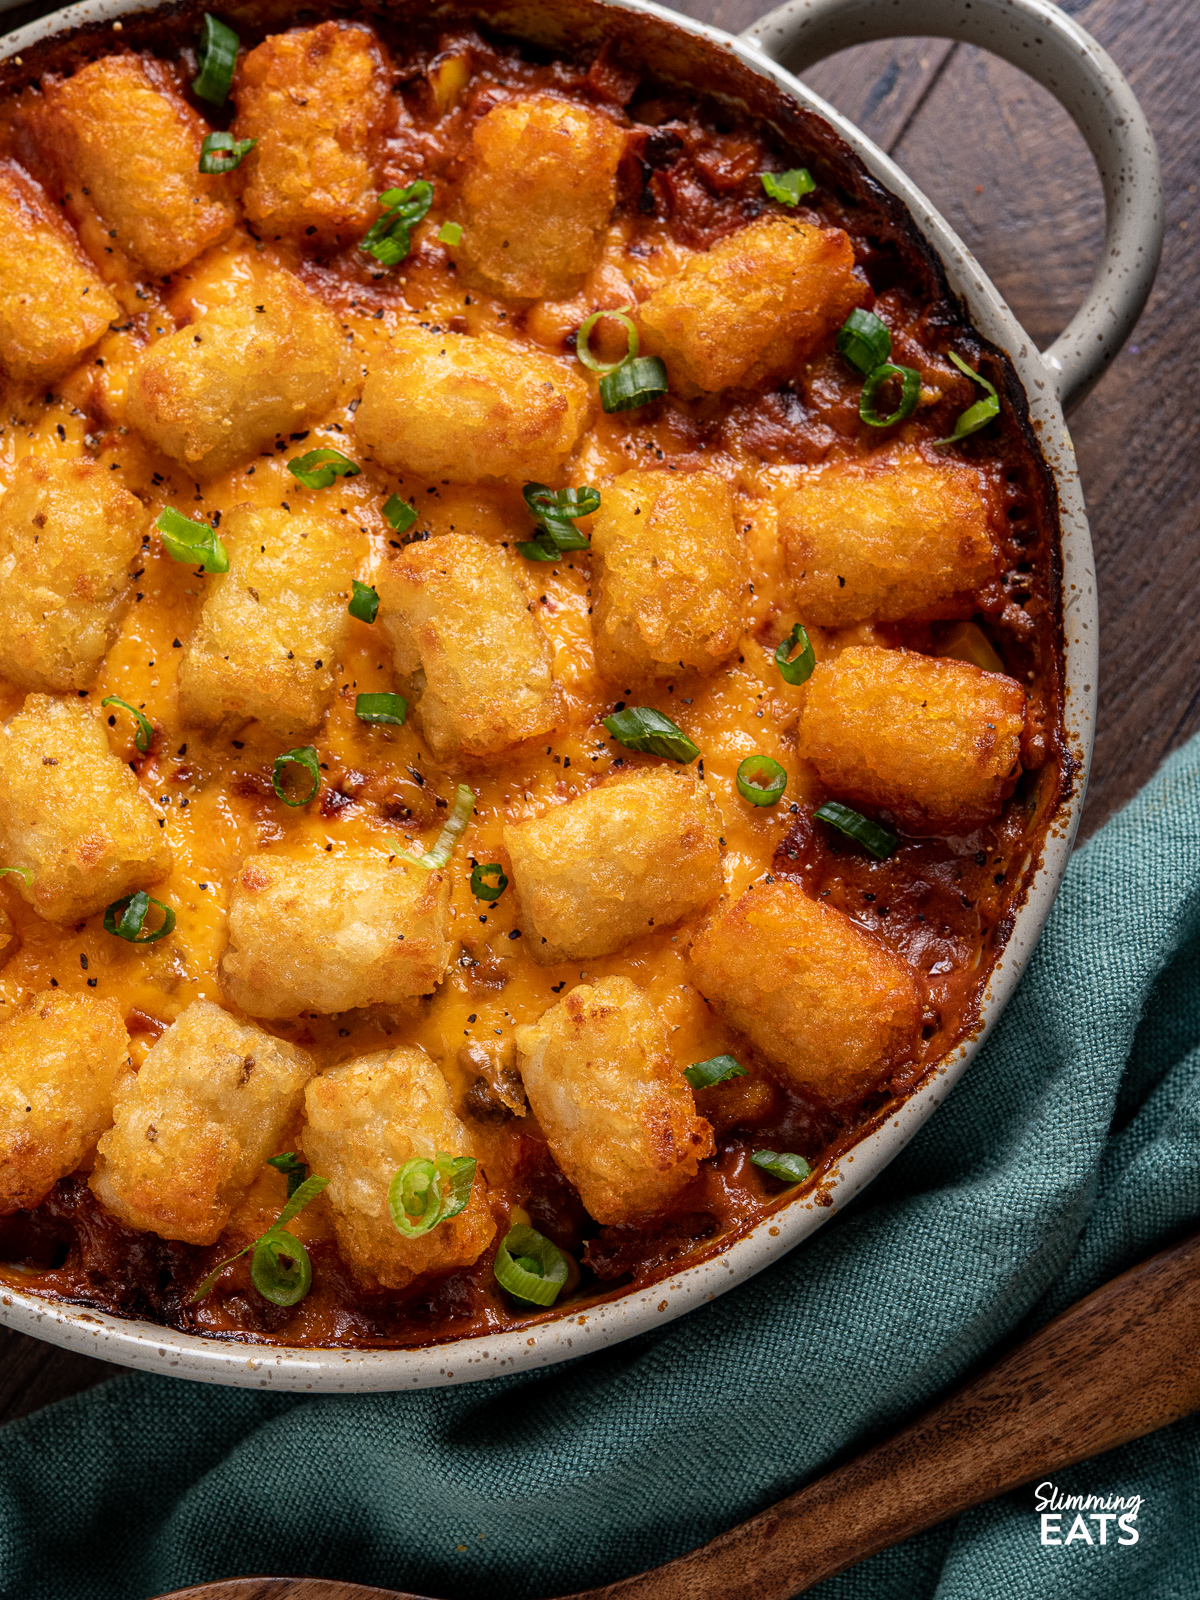 Tater Tot Casserole in a round oven dish with two handles